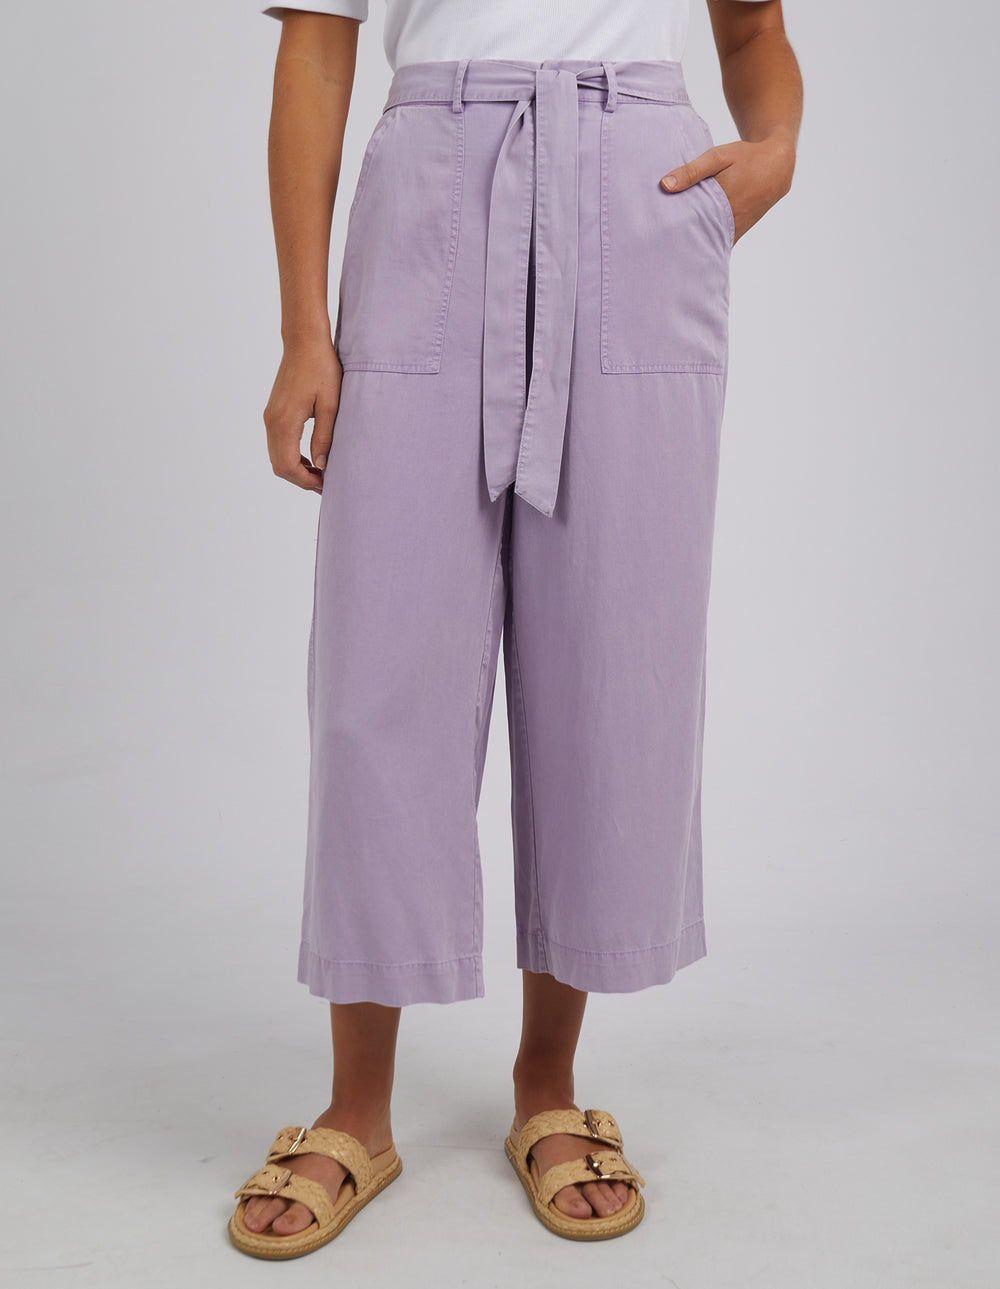 Elm - Bliss Washed Pant - Periwinkle